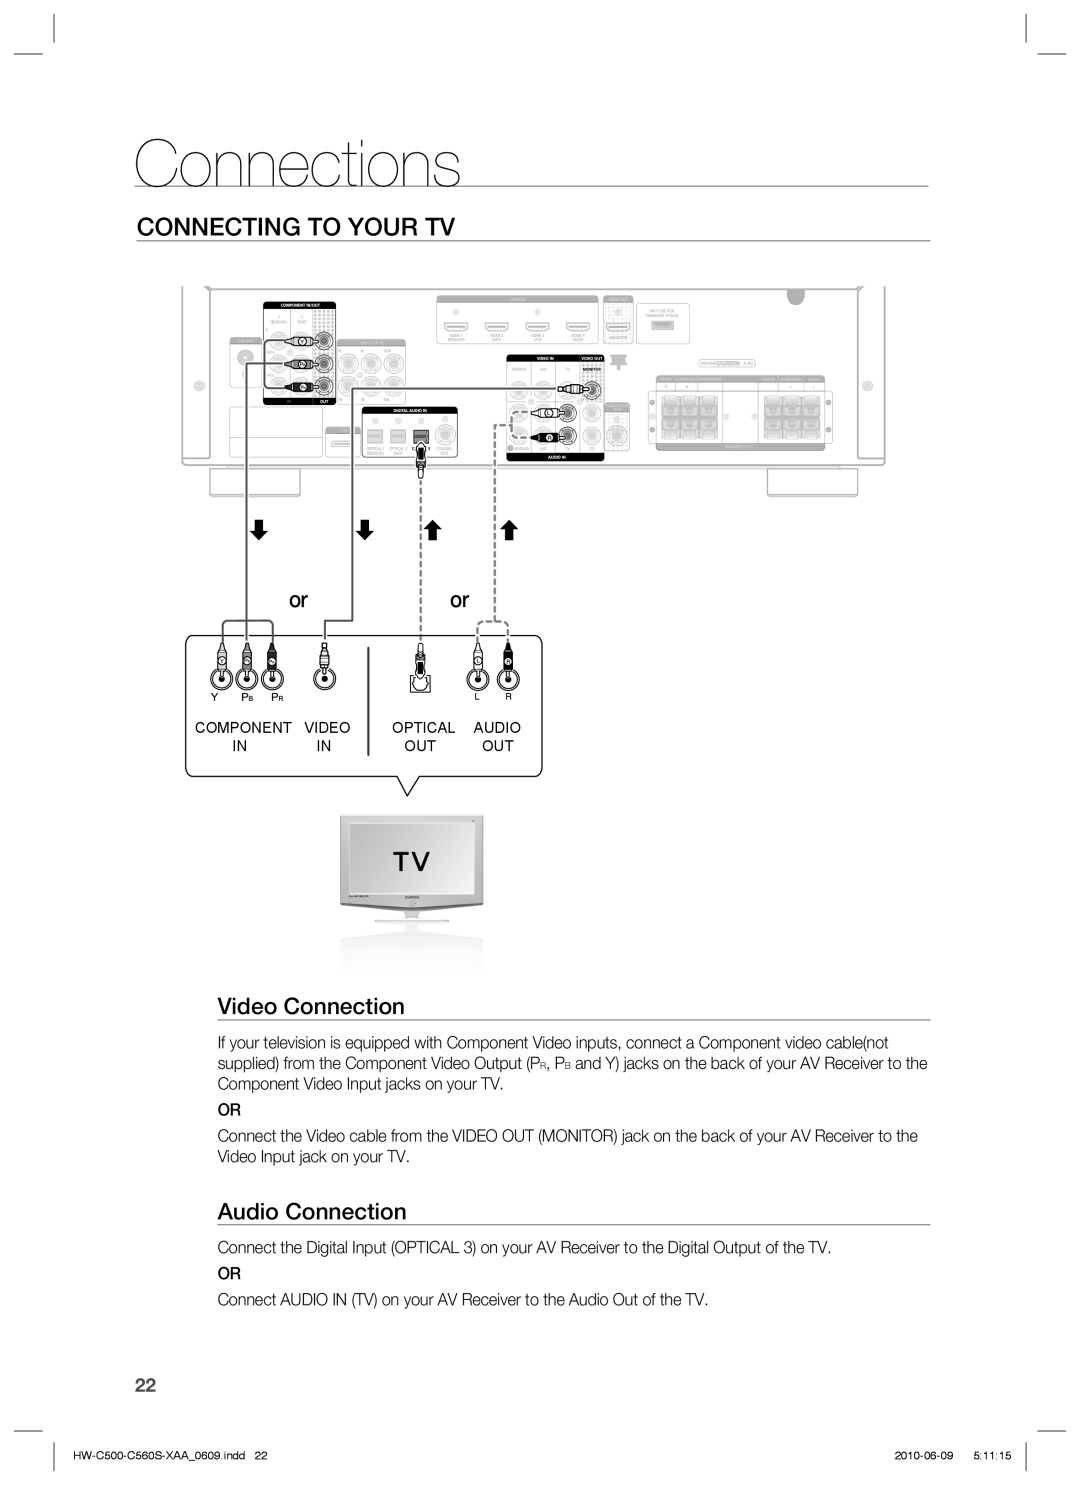 Samsung HW-C500, HW-C560S user manual Connecting To Your Tv, Video Connection, Audio Connection, Connections 